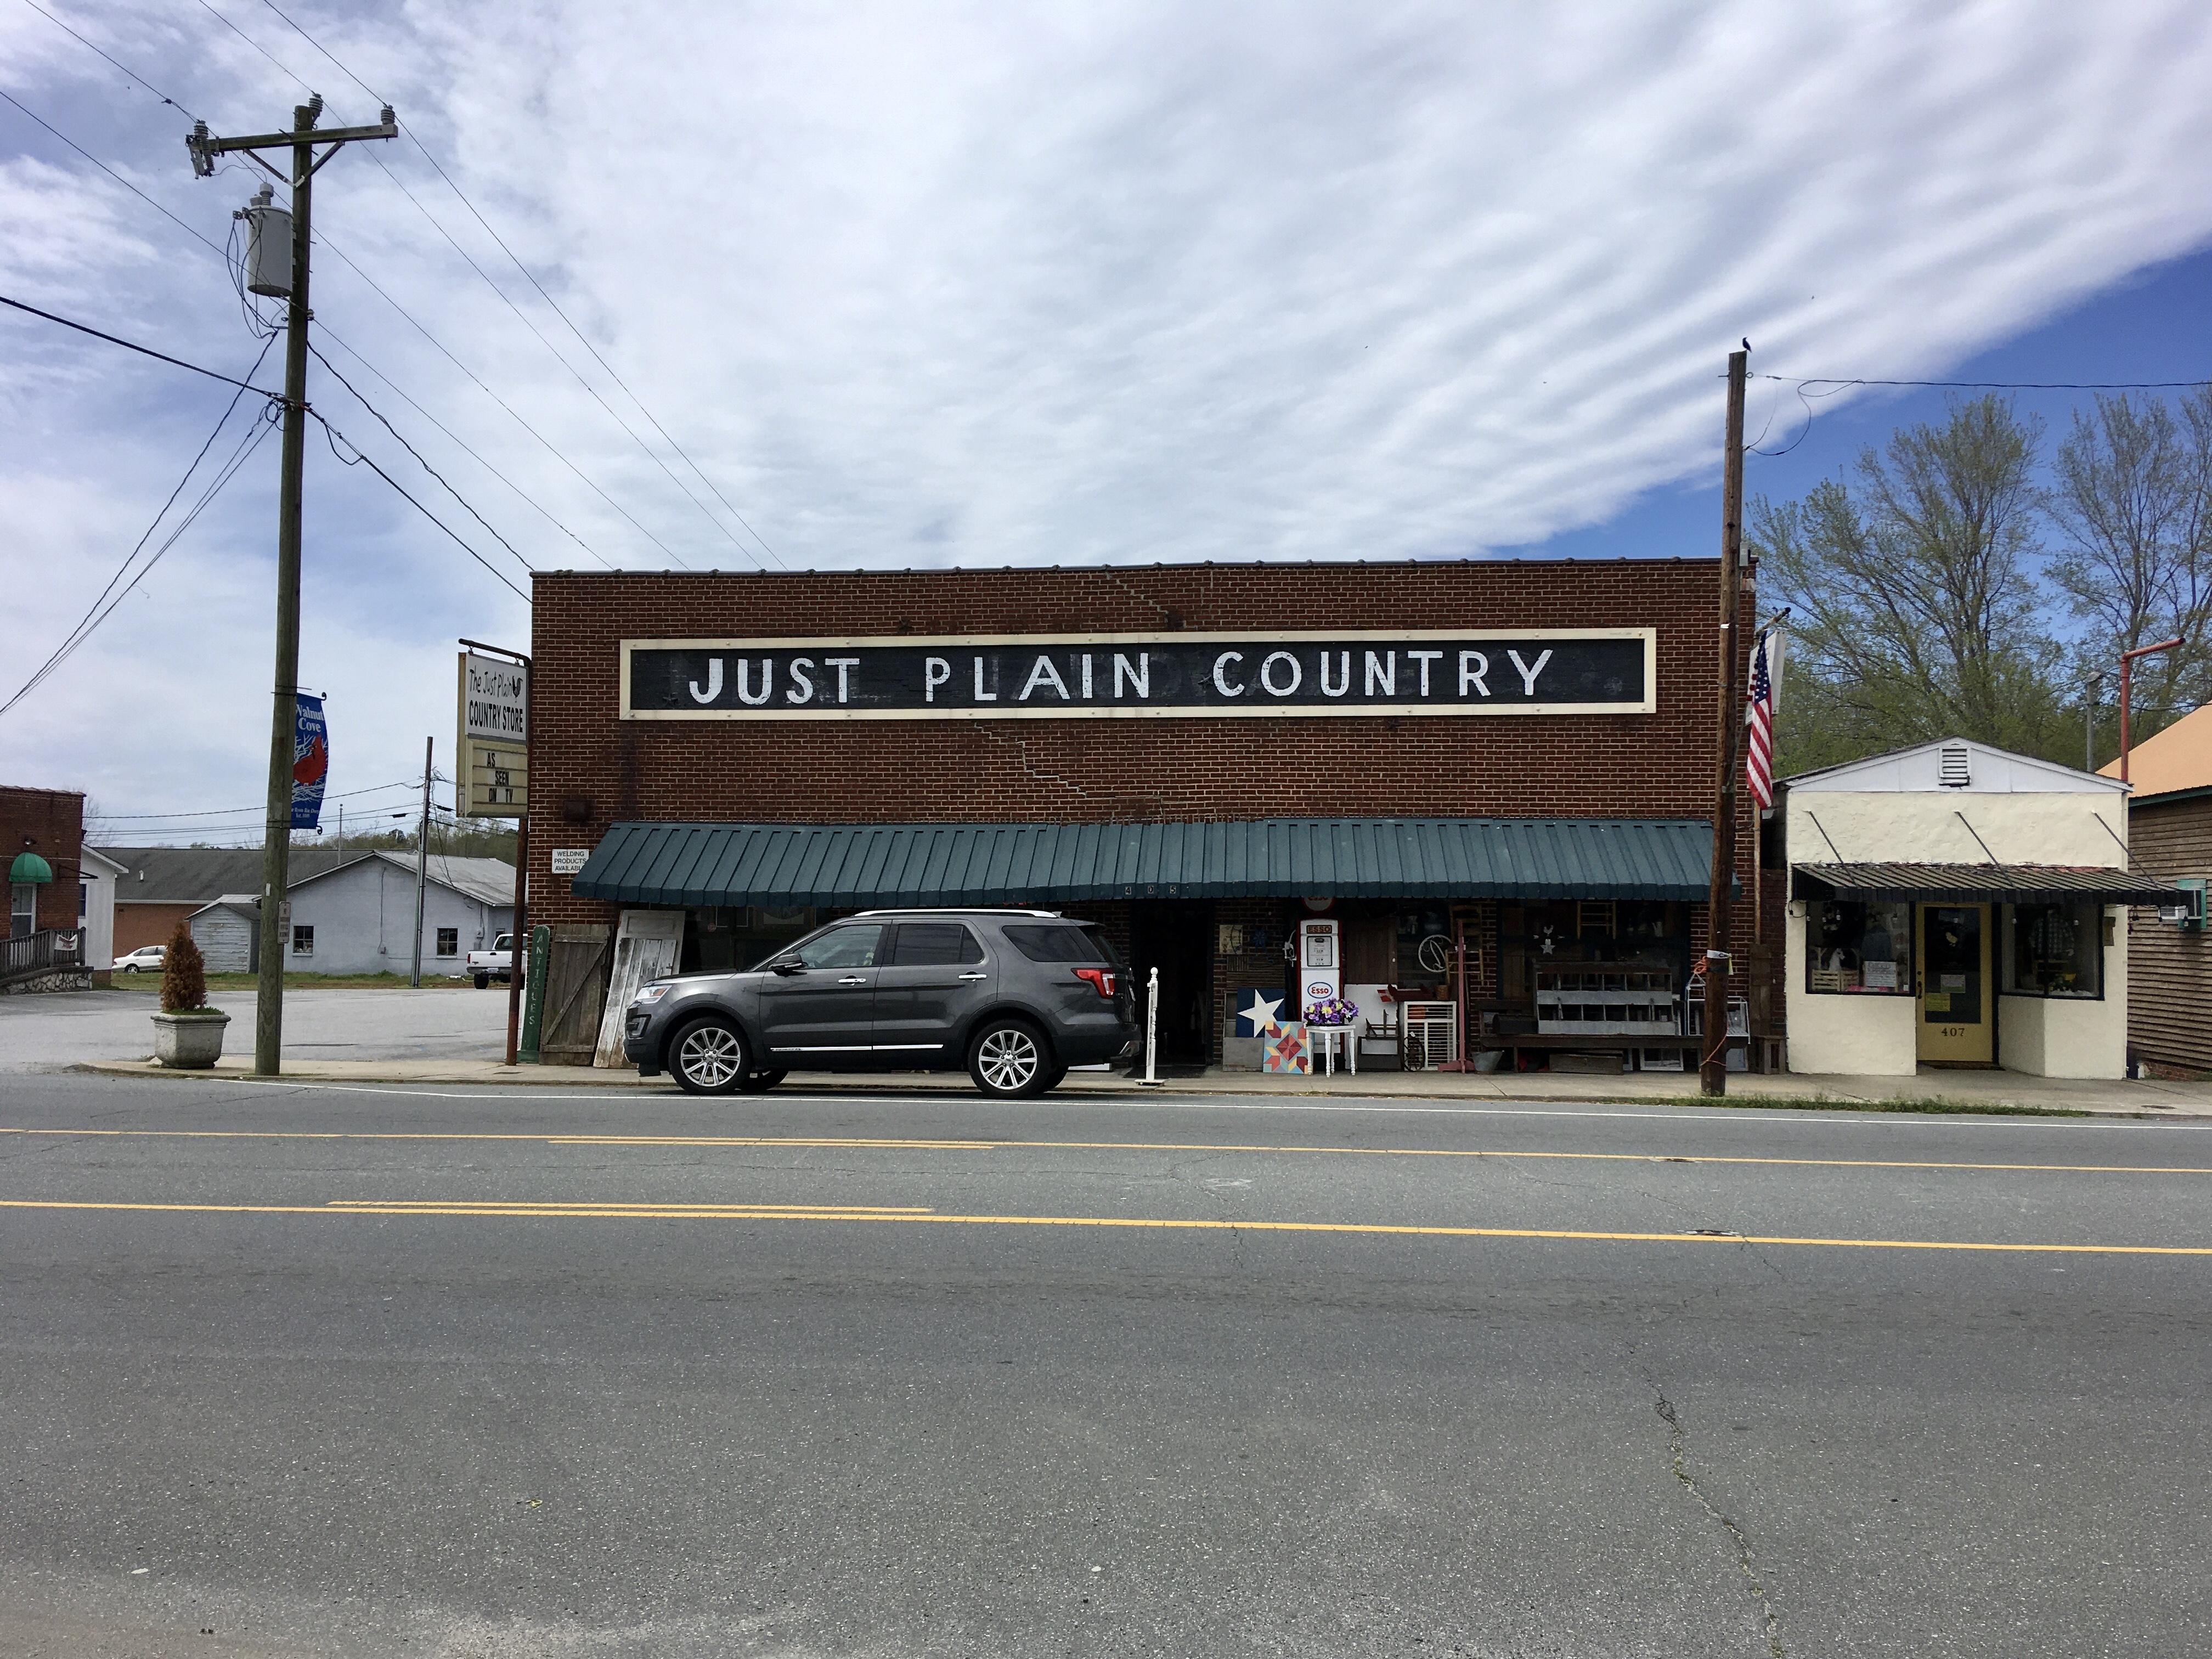 A red brick country store called 'Just Plain Country' in North Carolina. A car sits outside, telegraph poles either side.